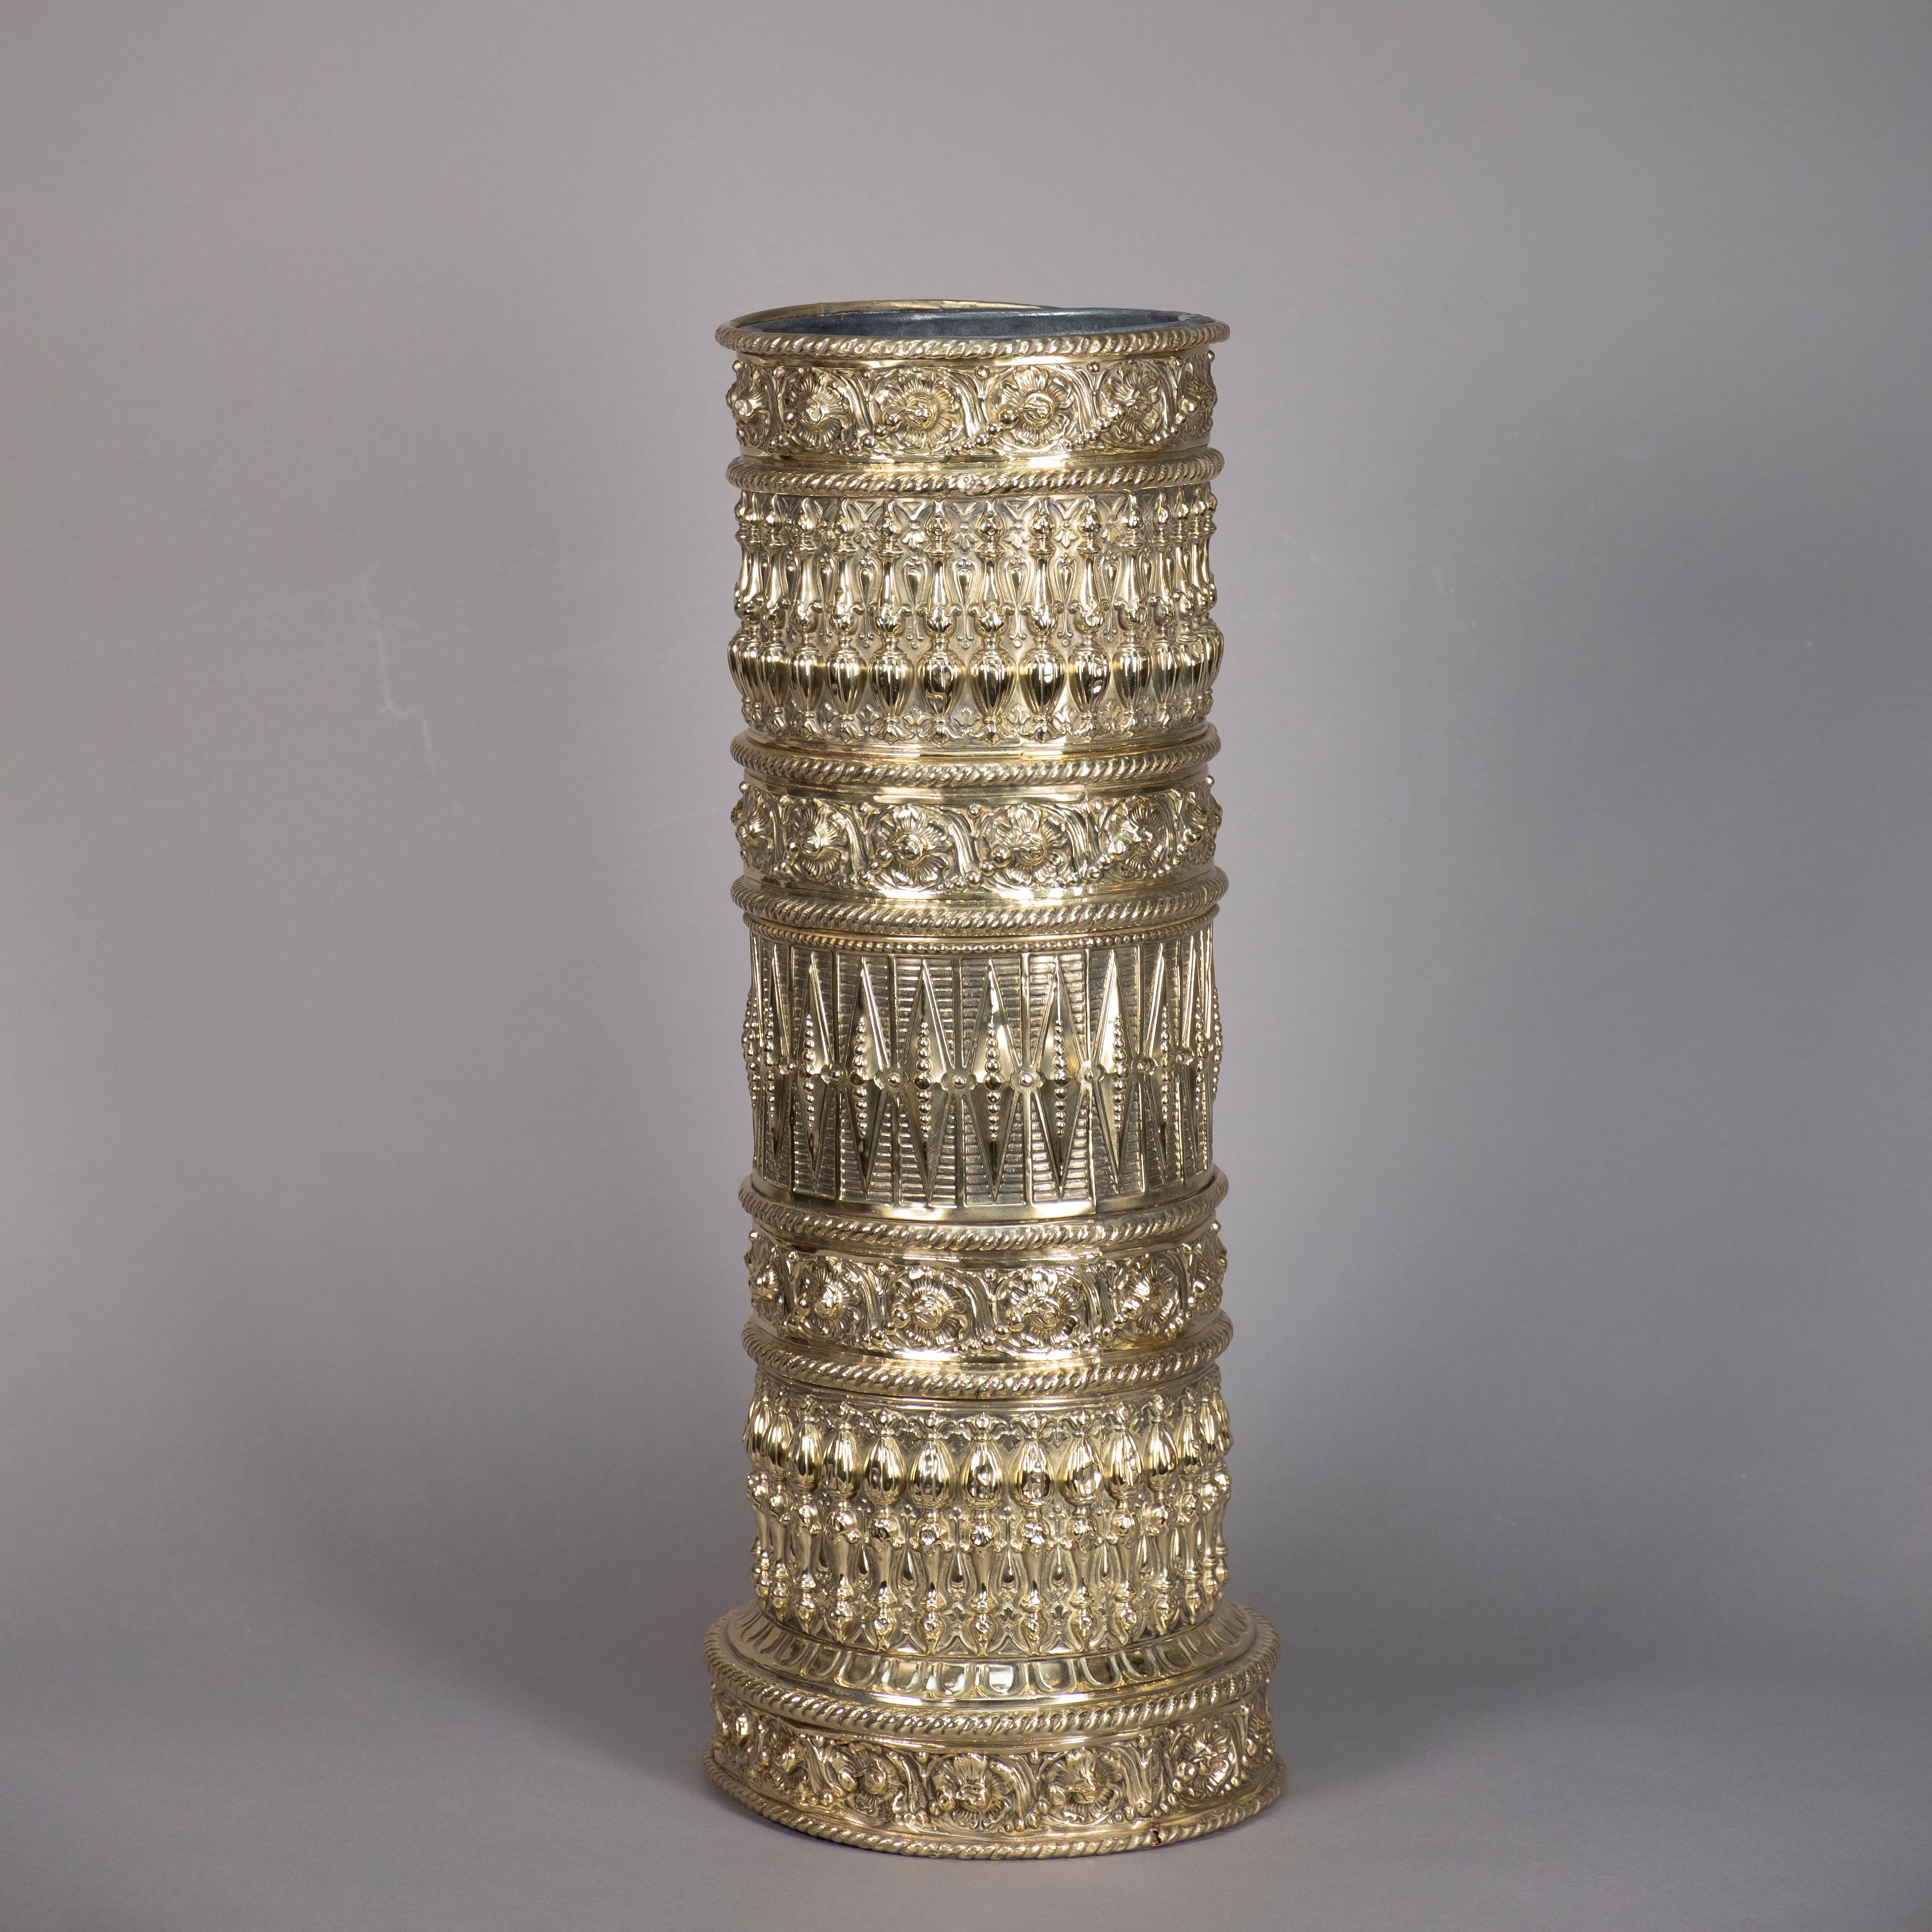 A rare mid-19th century Victorian Period repoussé brass stick stand or umbrella stand of cylindrical form and decorated throughout with elaborate geometric motifs. Retaining the original zinc liner.